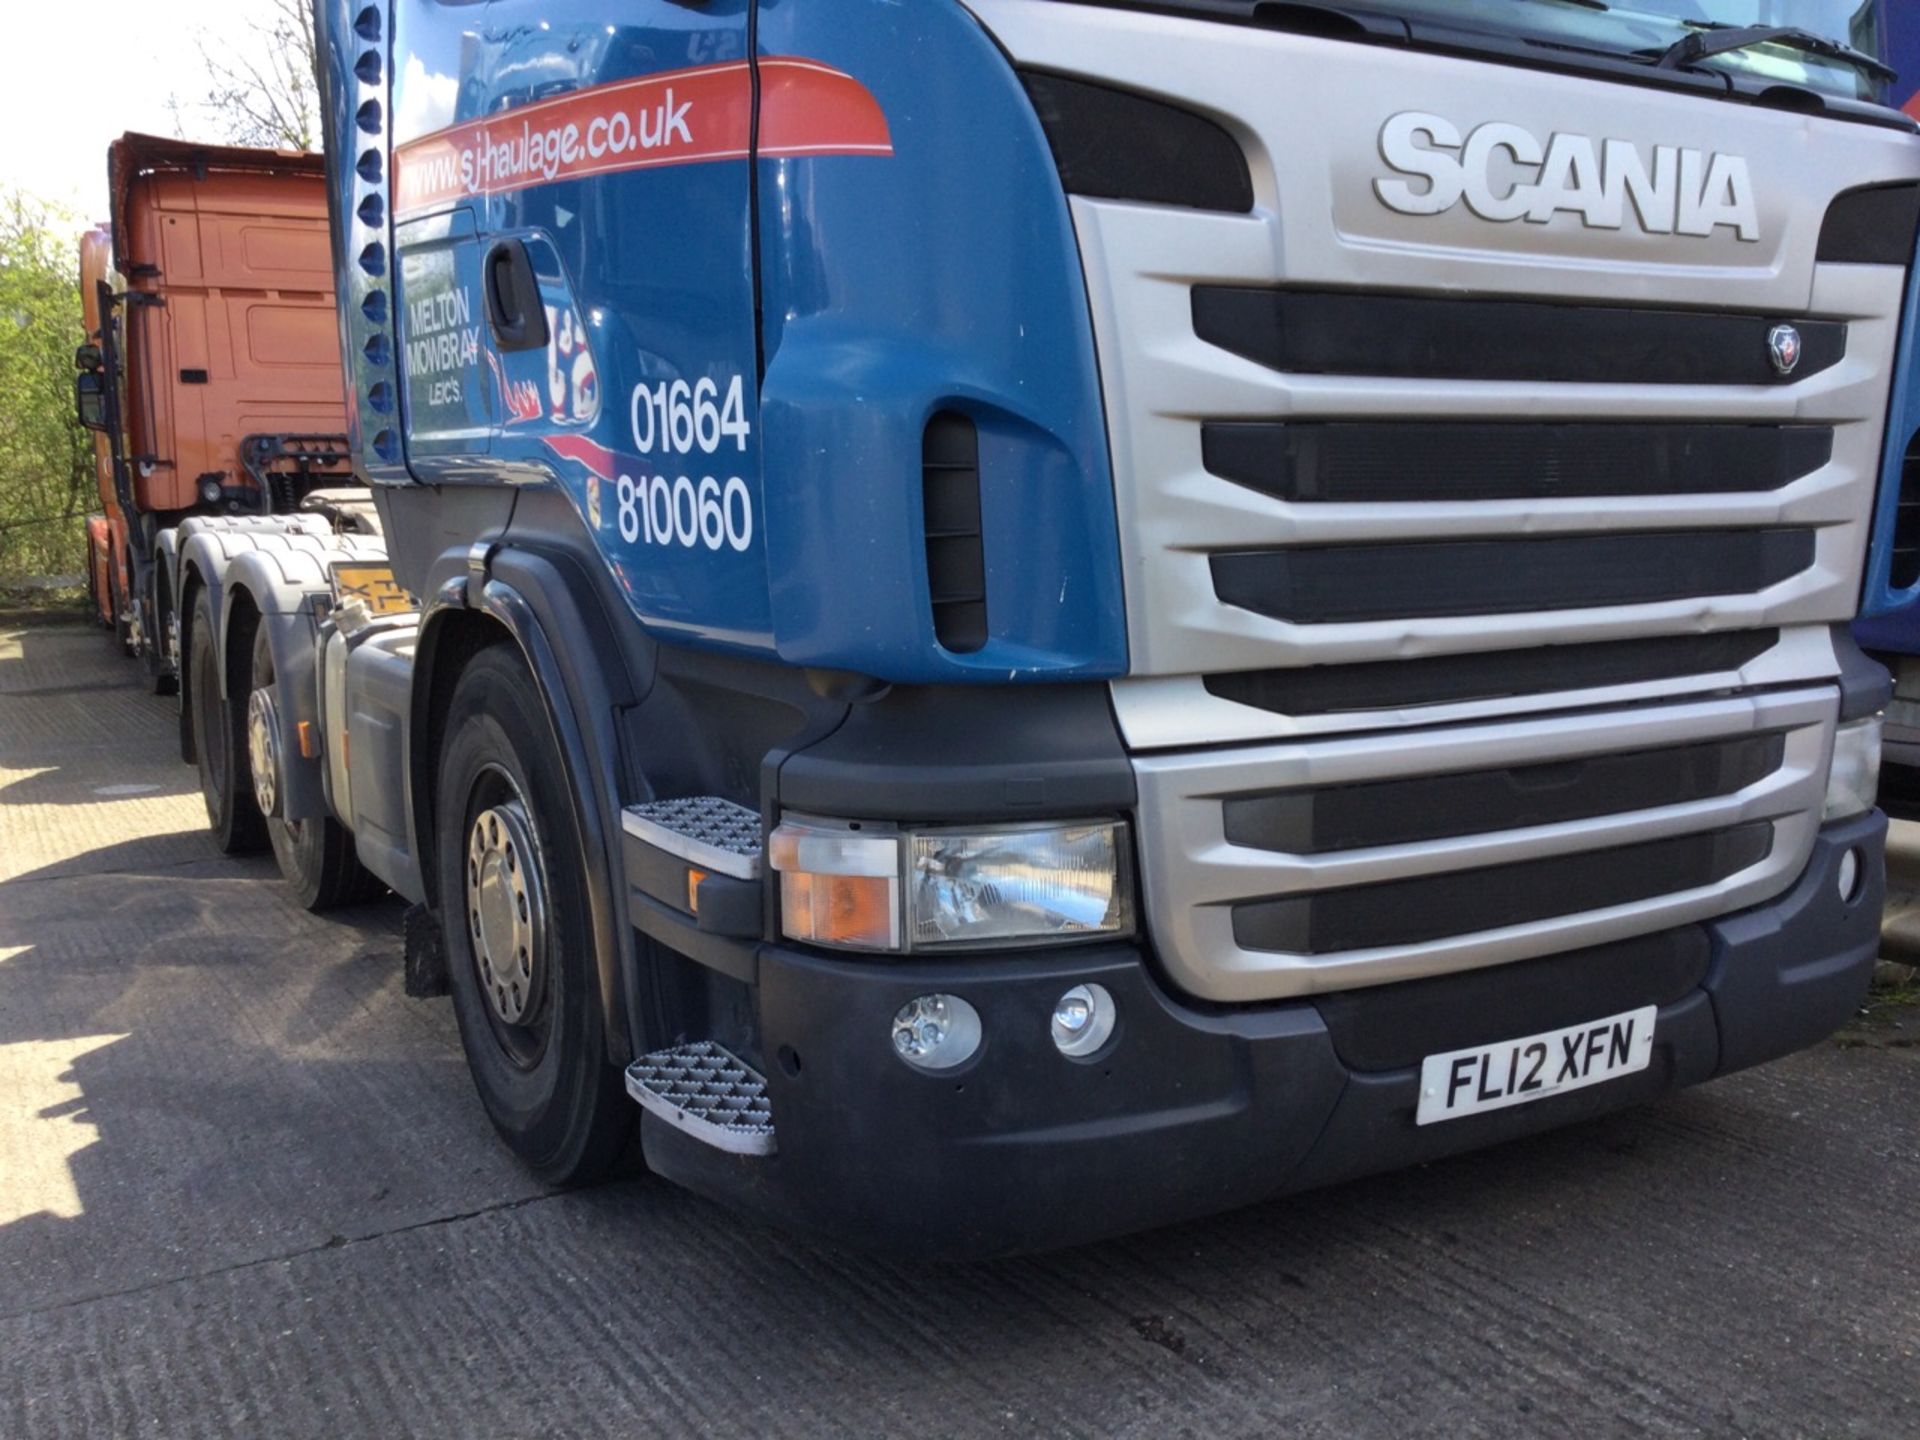 SCANIA R-SRS L-CLASS 6x2 Tractor Unit With Midlift, Sleeper Cab Mot Until 31/07/241160852kms, Regist - Image 2 of 6